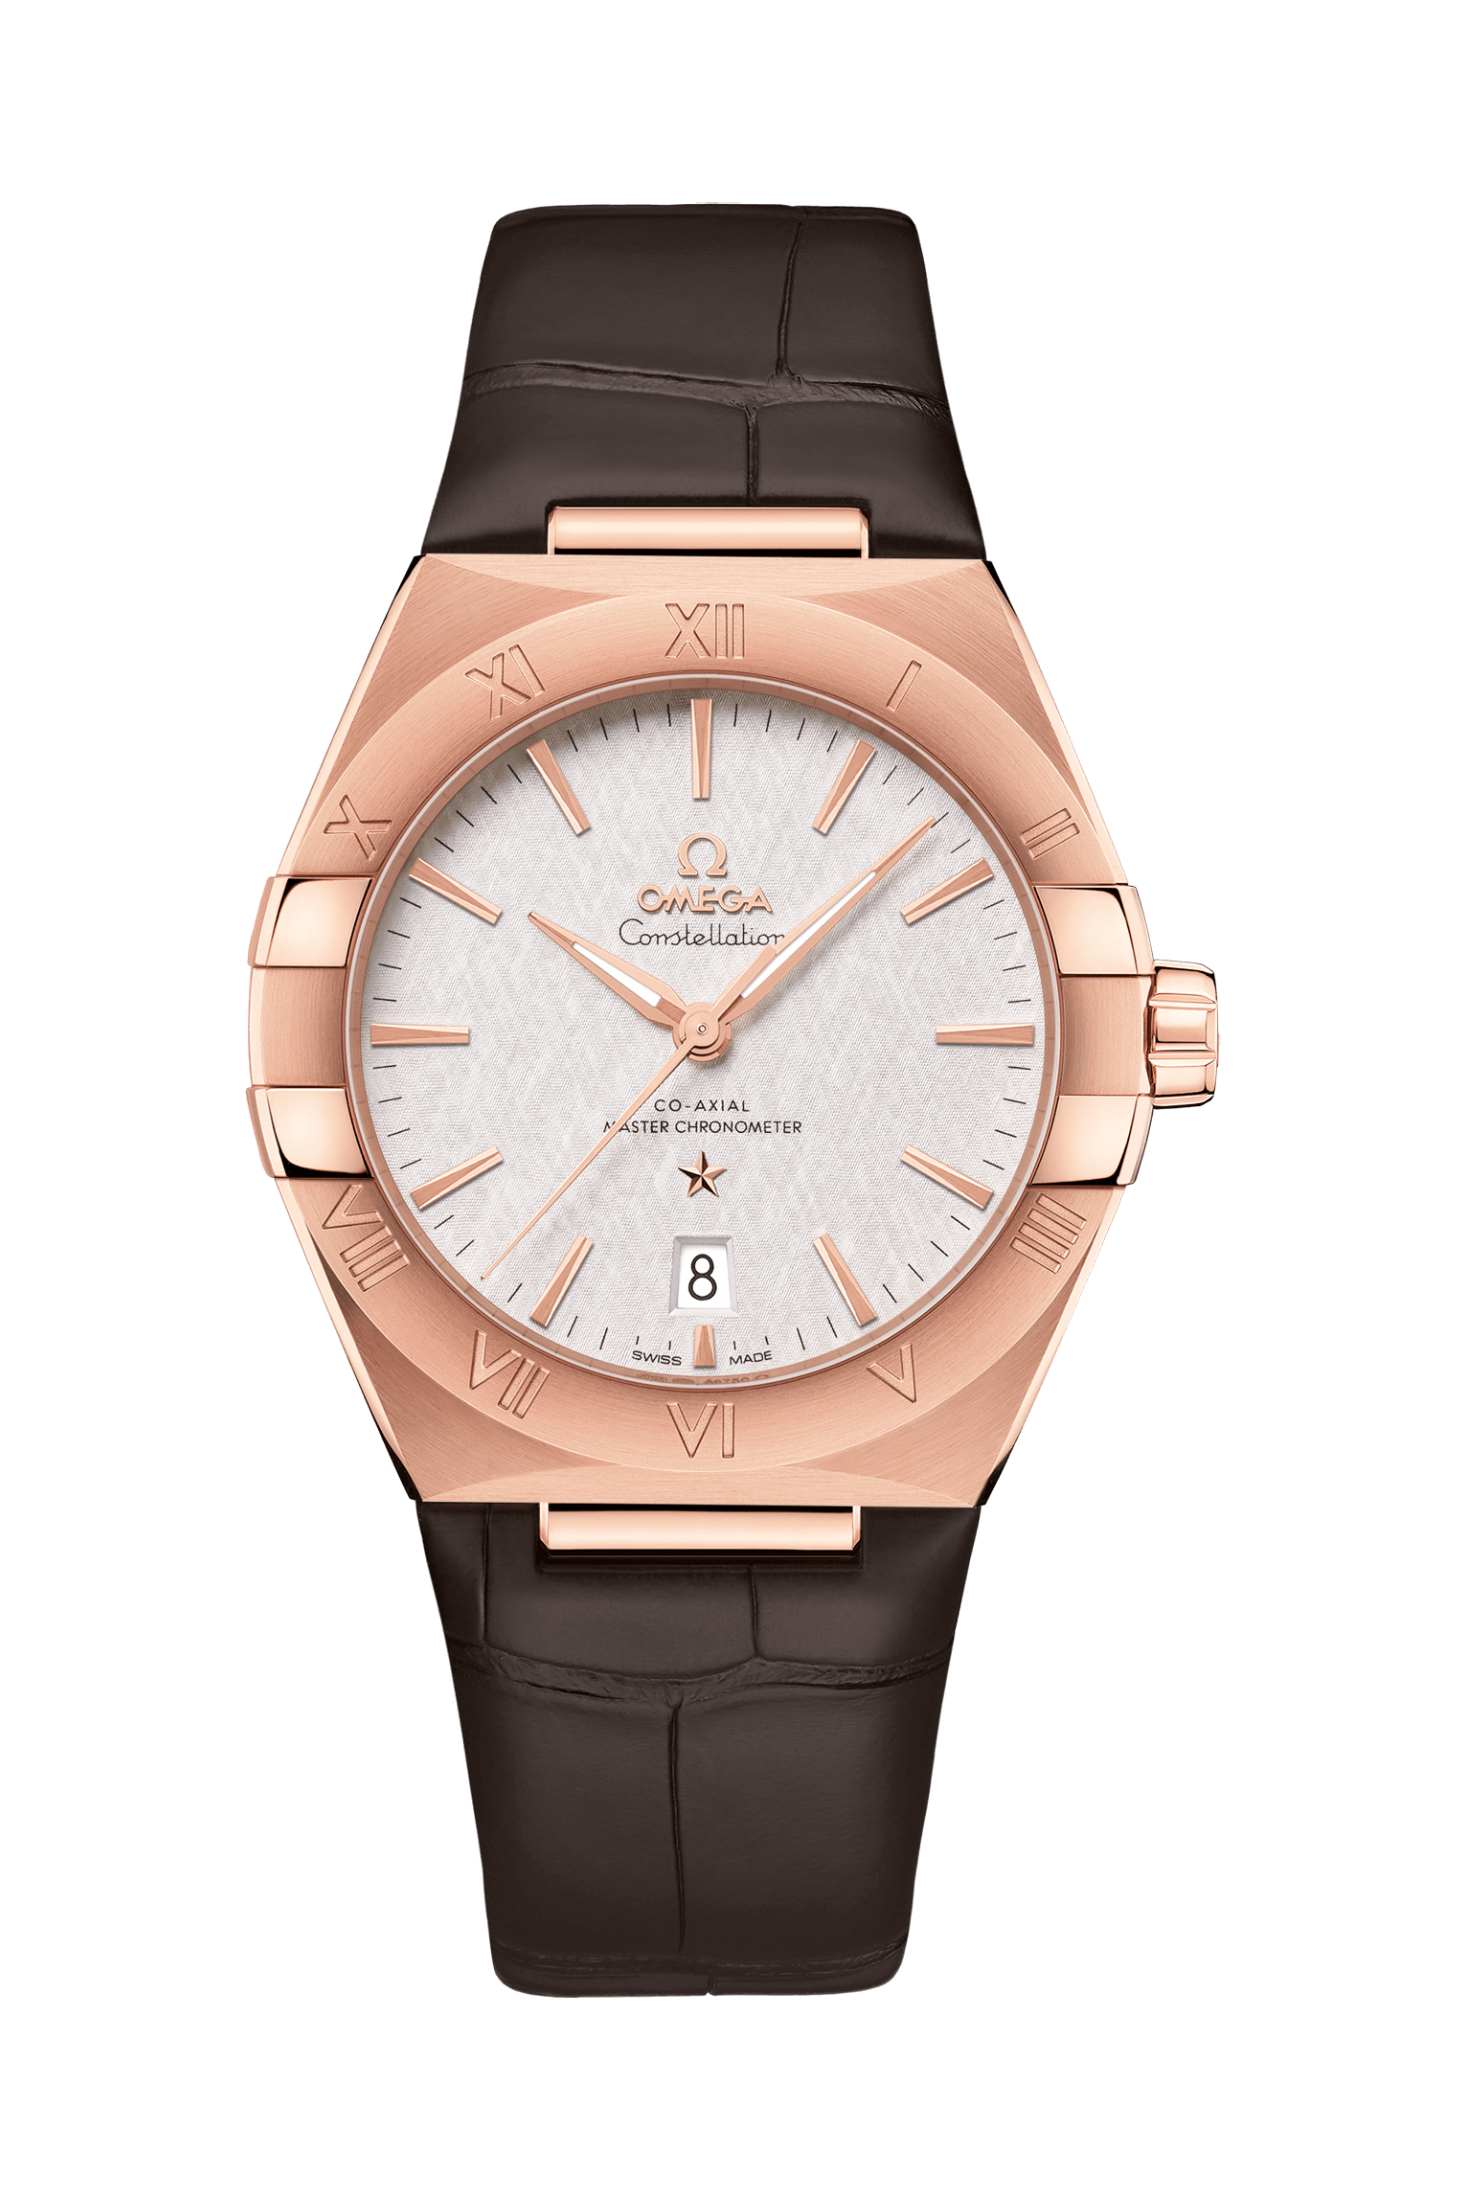 Men's watch / unisex  OMEGA, Constellation Co Axial Master Chronometer / 39mm, SKU: 131.53.39.20.02.001 | watchapproach.com